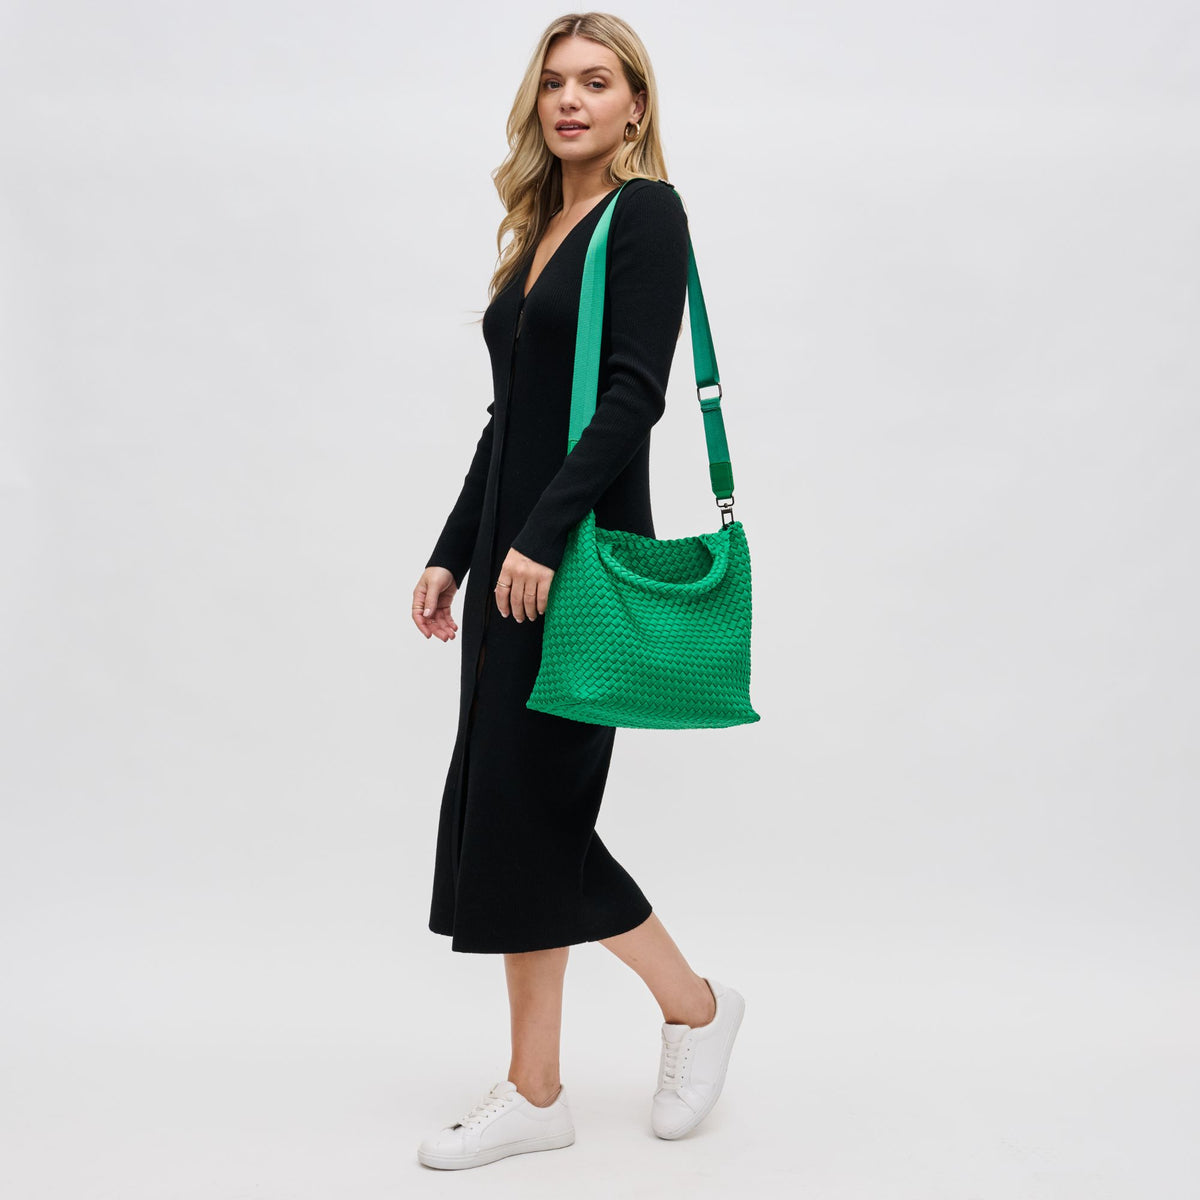 Woman wearing Kelly Green Sol and Selene Sky's The Limit - Medium Tote 841764108805 View 4 | Kelly Green